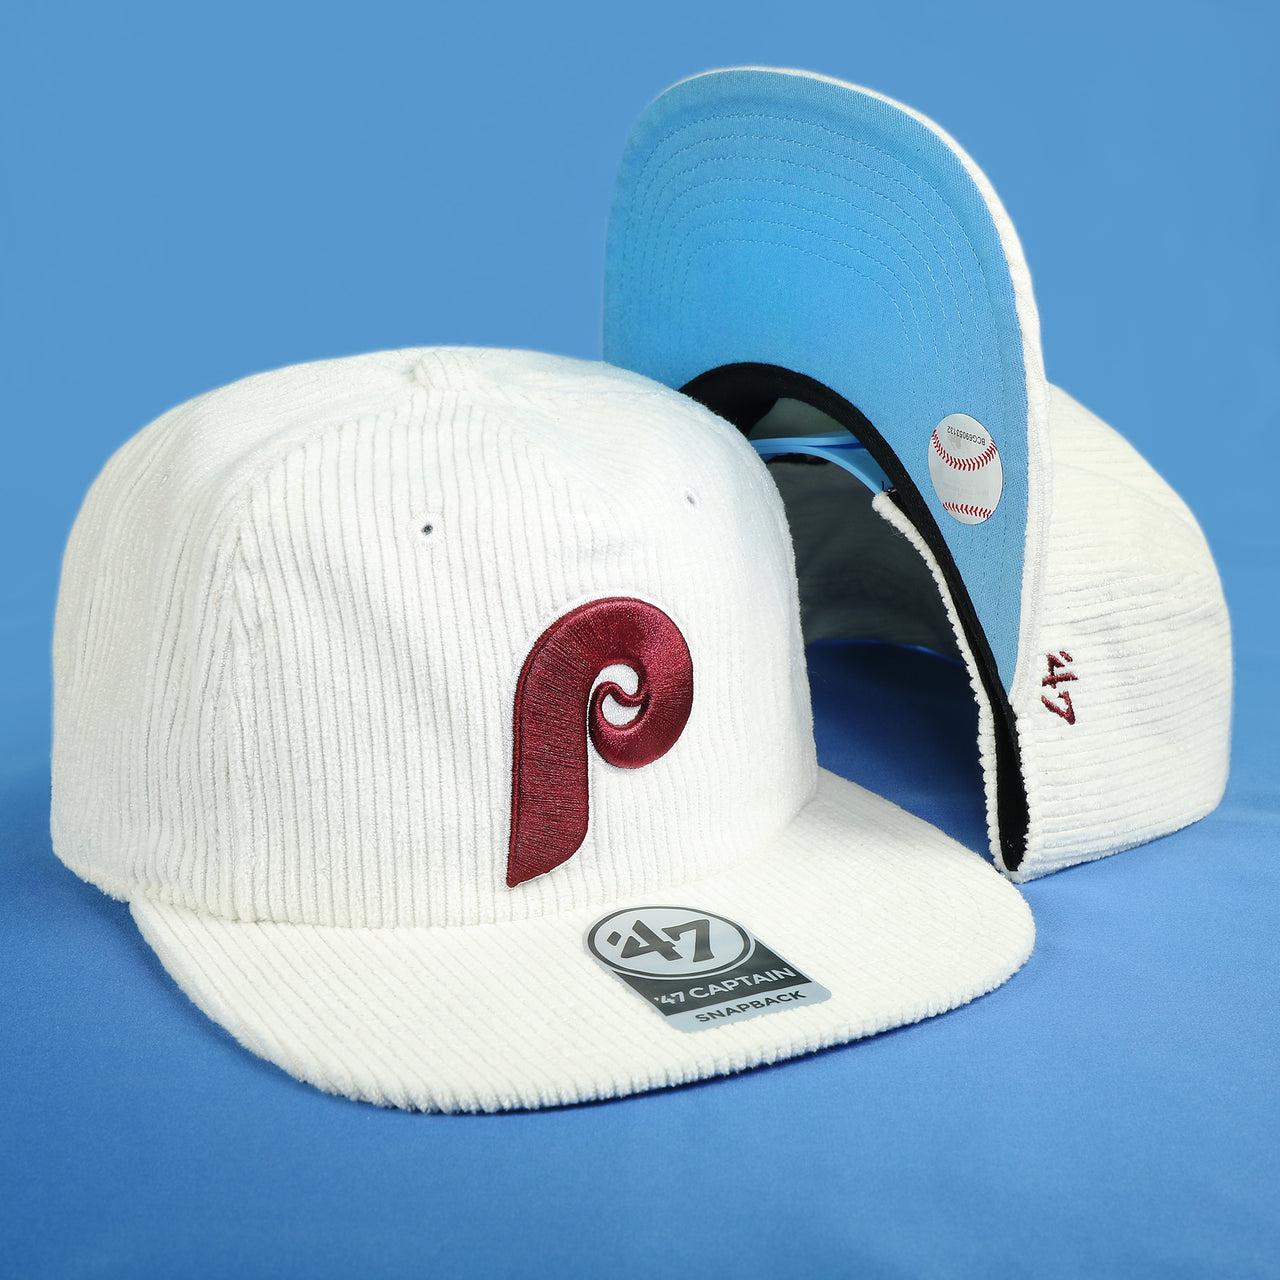 The Cooperstown Philadelphia Phillies Corduroy Snapback Hat | White Corduroy Snap Cap on a blue background